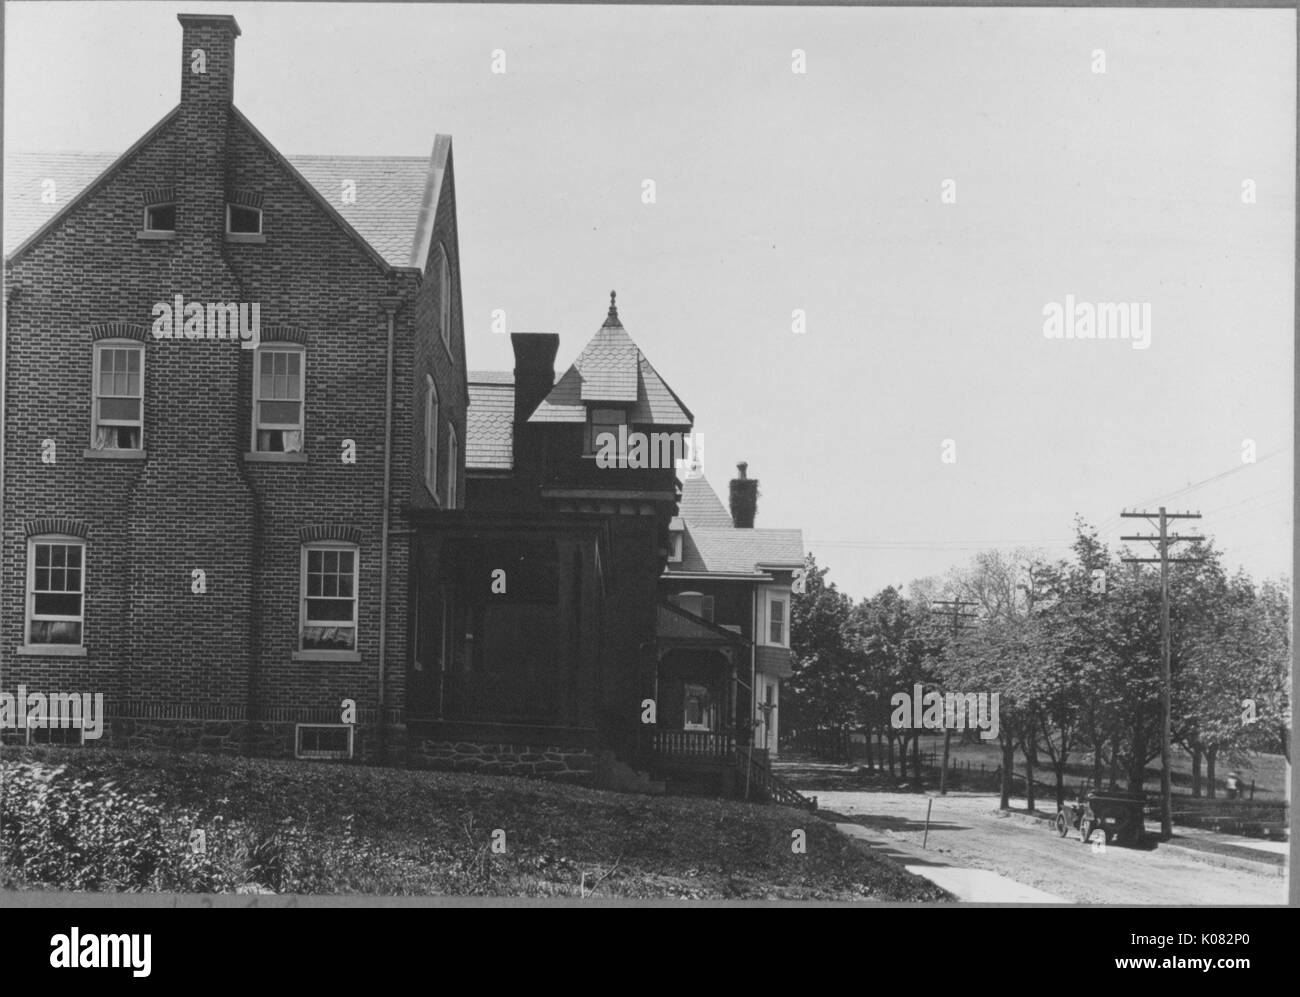 Side view of brick house on quiet street, house has four large windows on side, chimney and front porch, front porch overlooks trees, vacant spot with vegetation on side of house, Baltimore, Maryland, 1910. This image is from a series documenting the construction and sale of homes in the Roland Park/Guilford neighborhood of Baltimore, a streetcar suburb and one of the first planned communities in the United States. Stock Photo